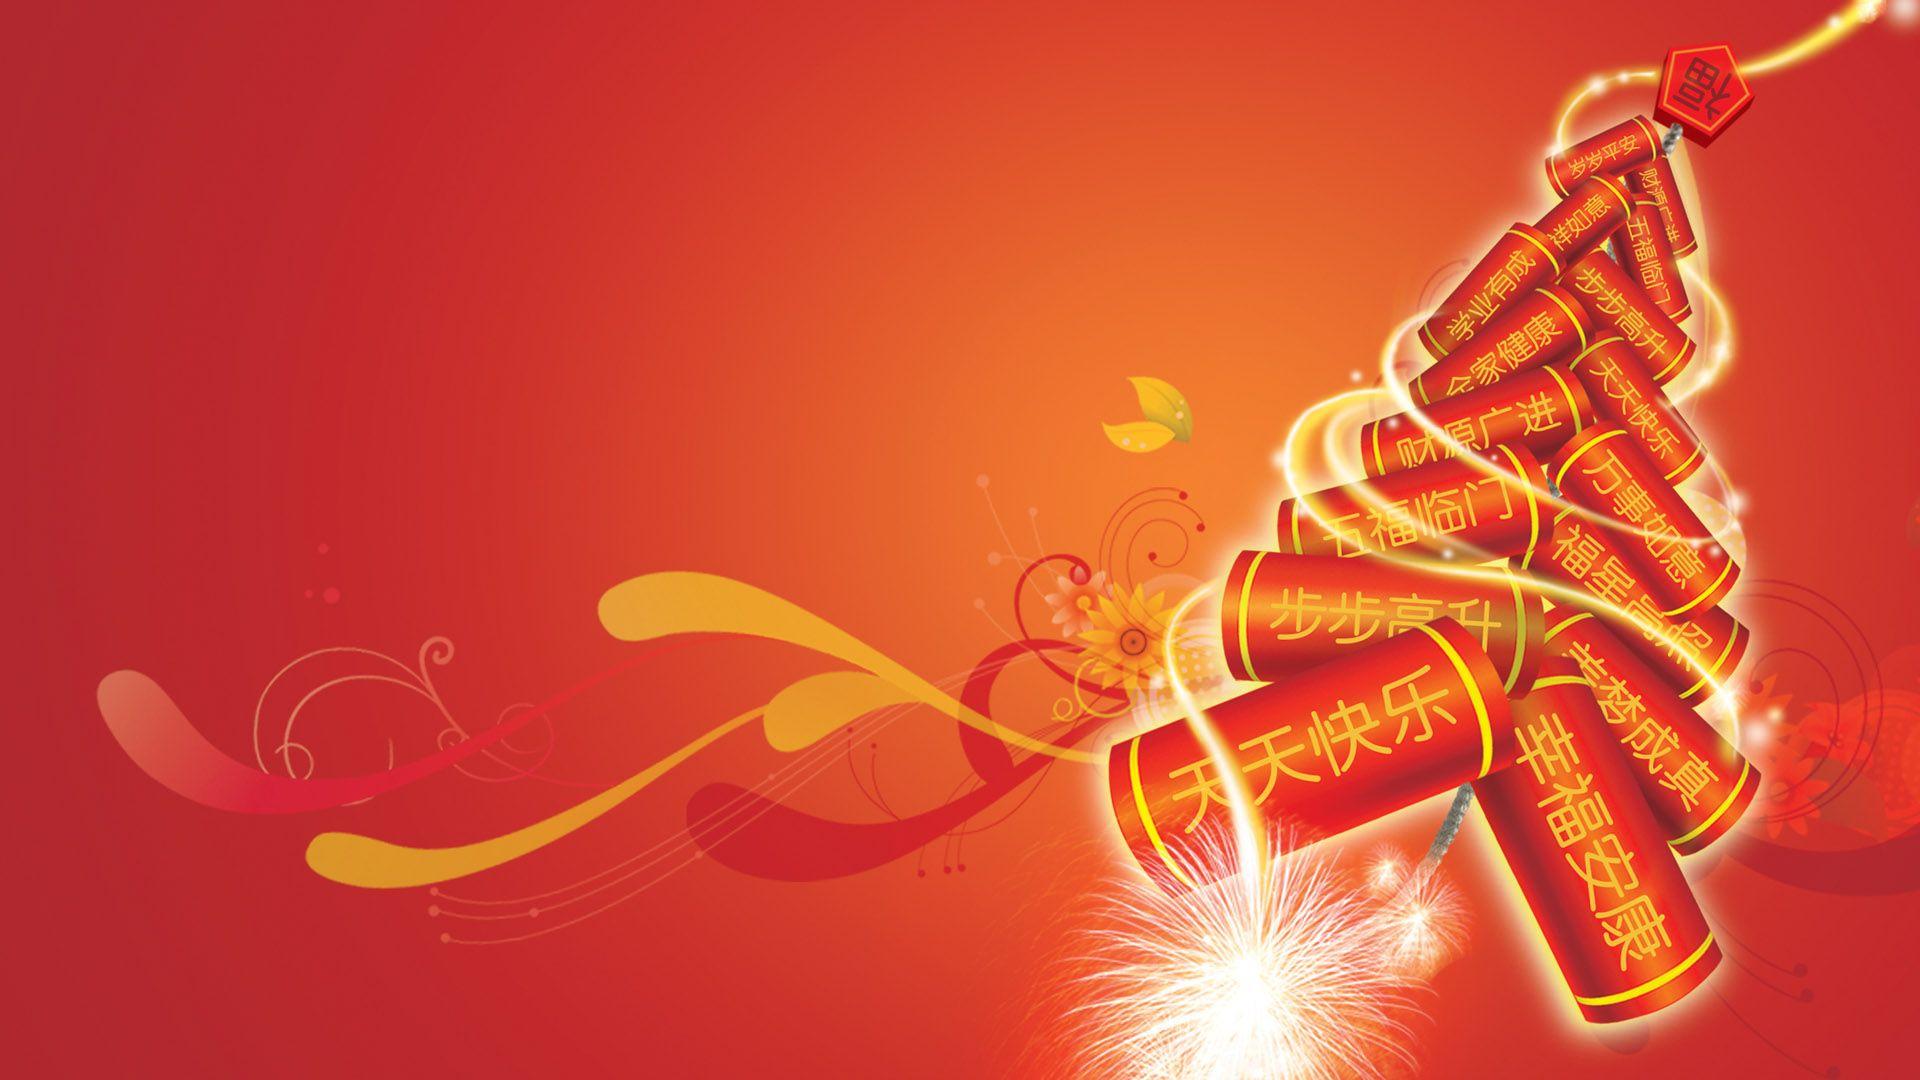 Happy Chinese New Year 2019 Image Greetings Wallpaper. Trending